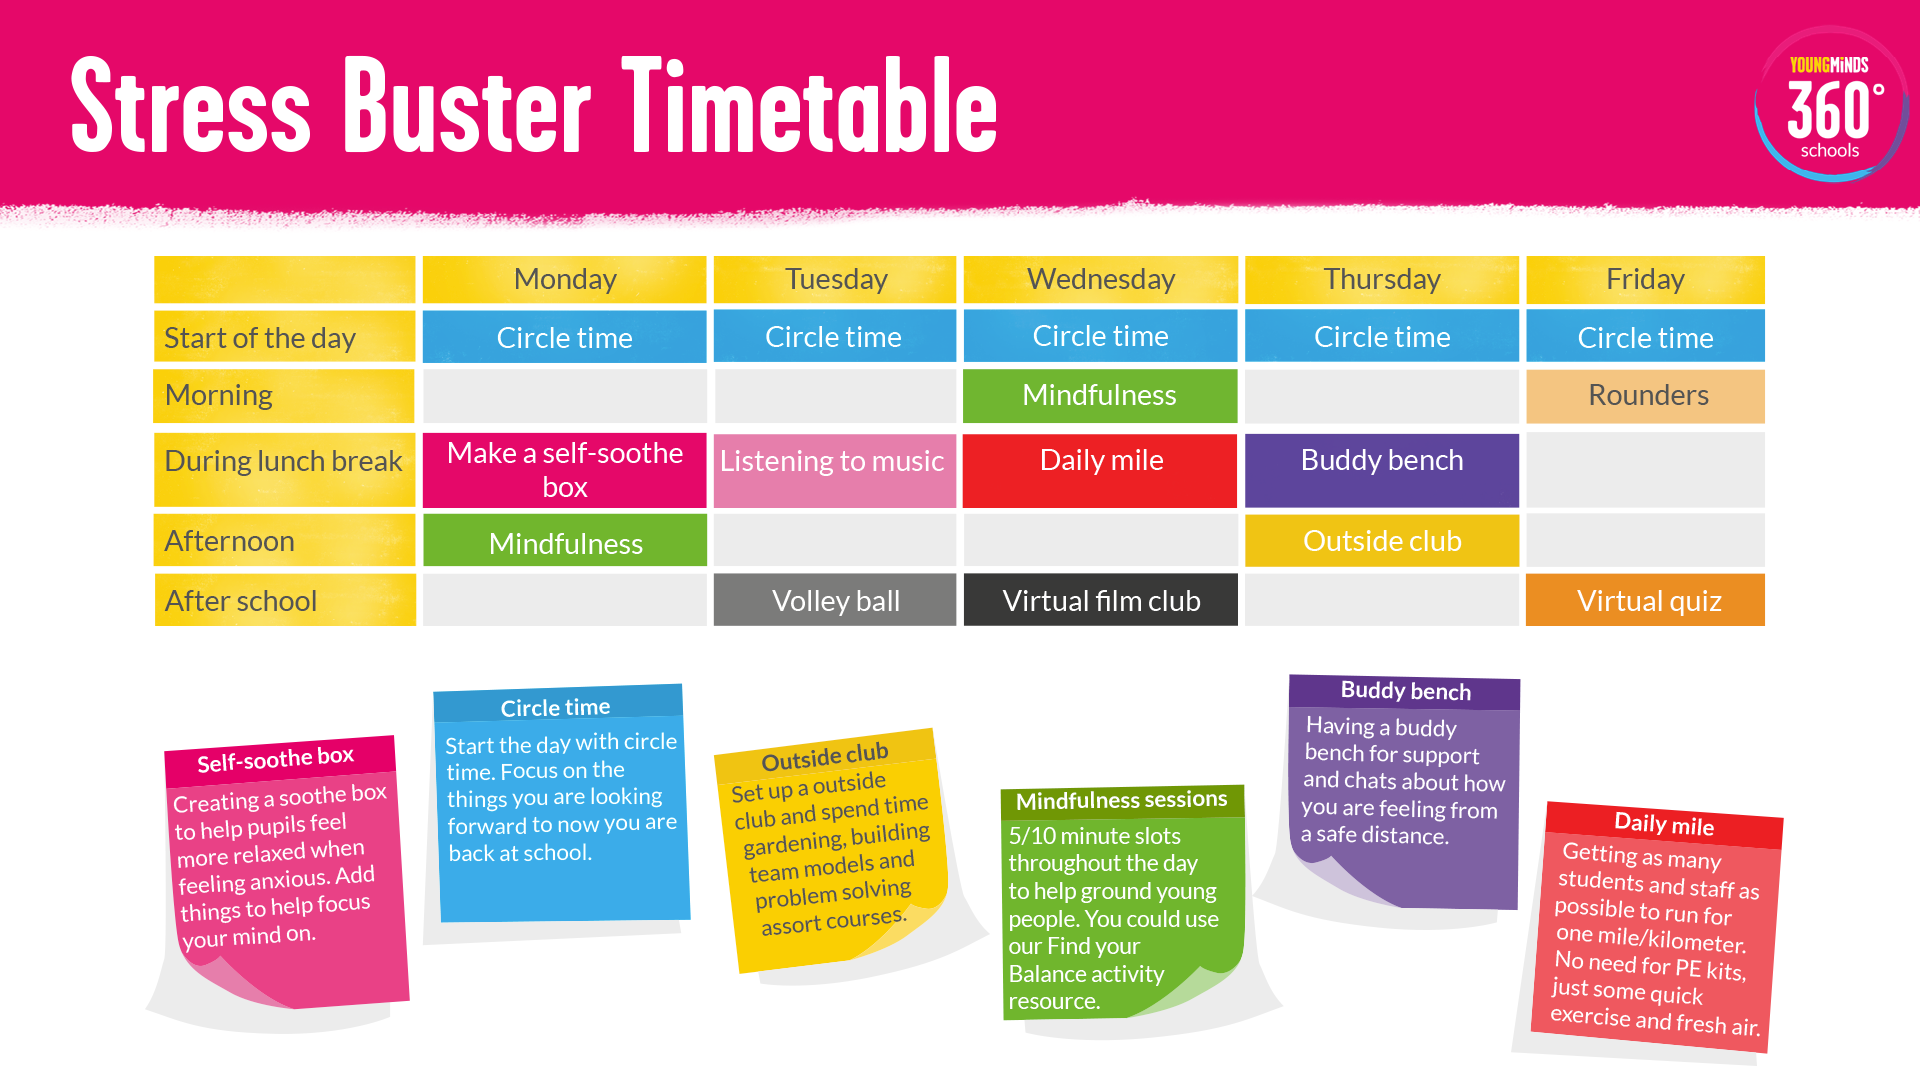 An image of our Stress Buster Timetable.